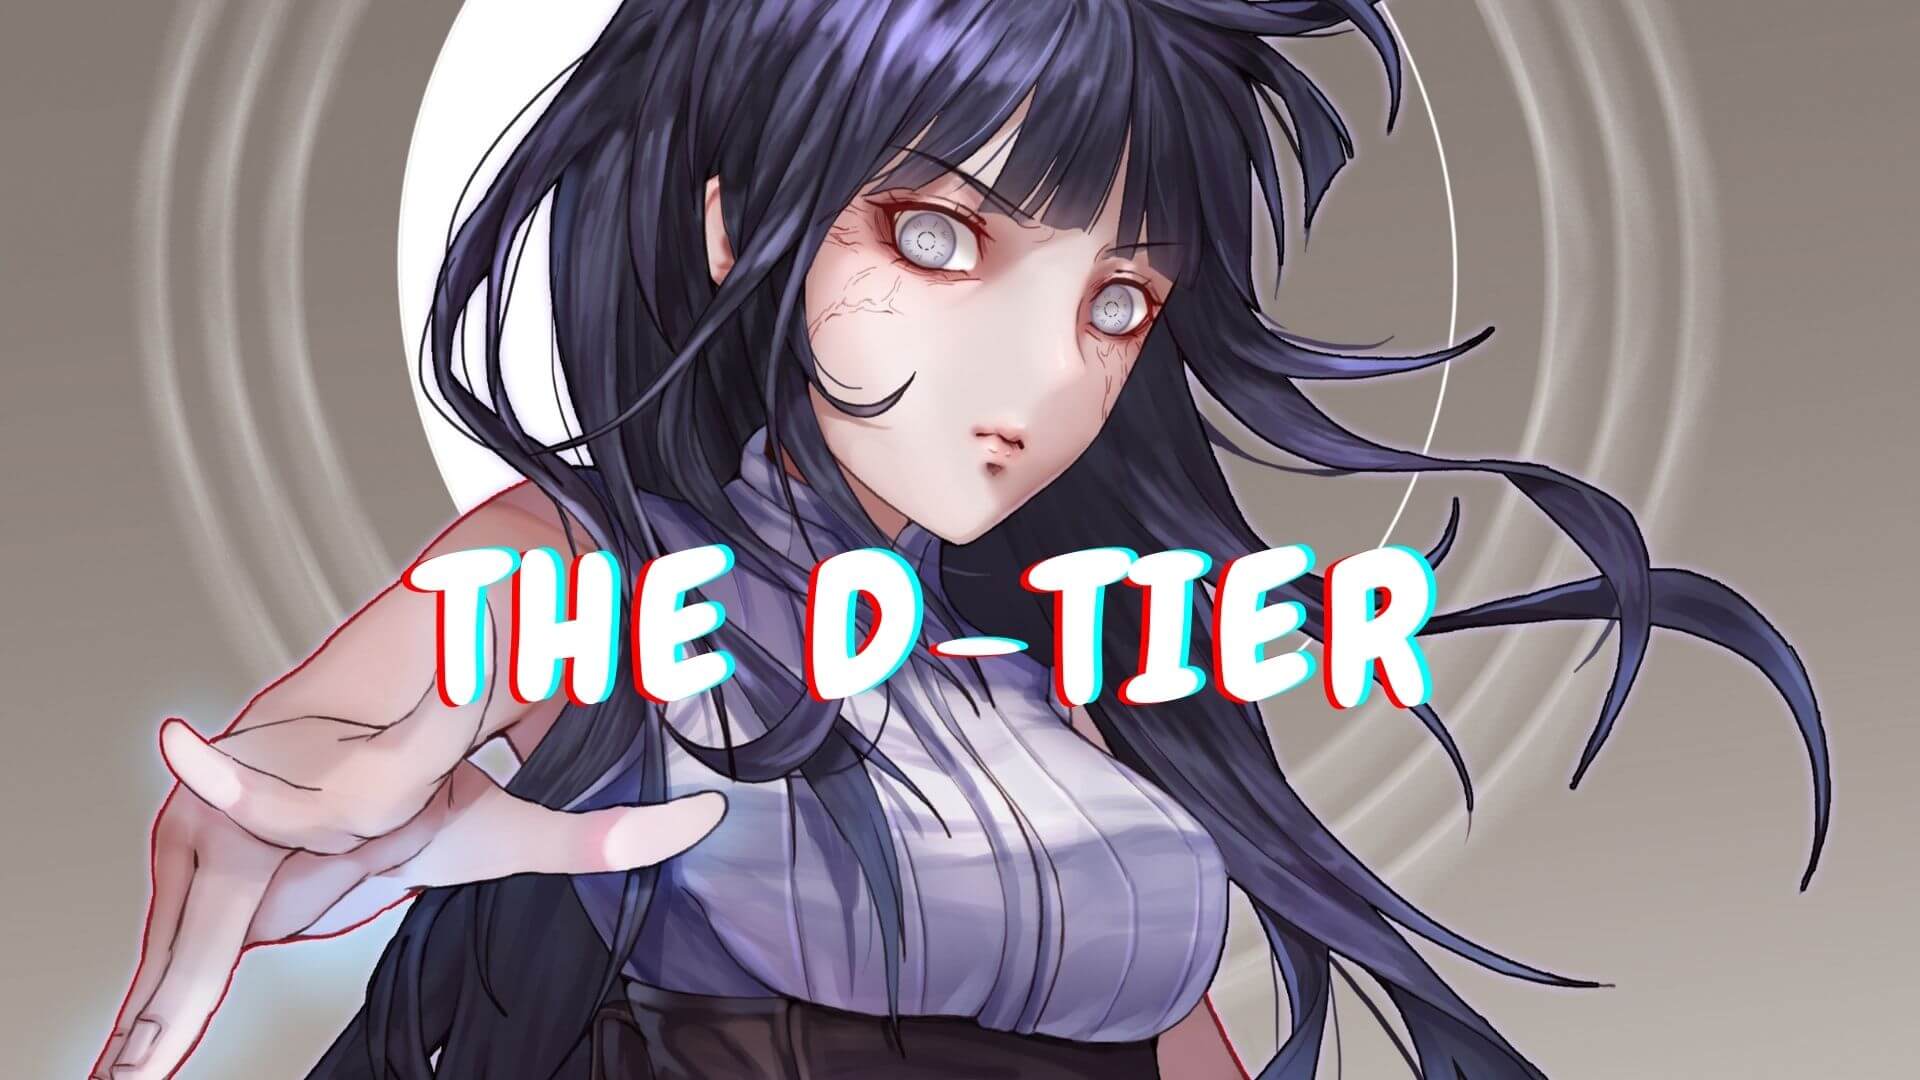 D Tier female anime and game characters